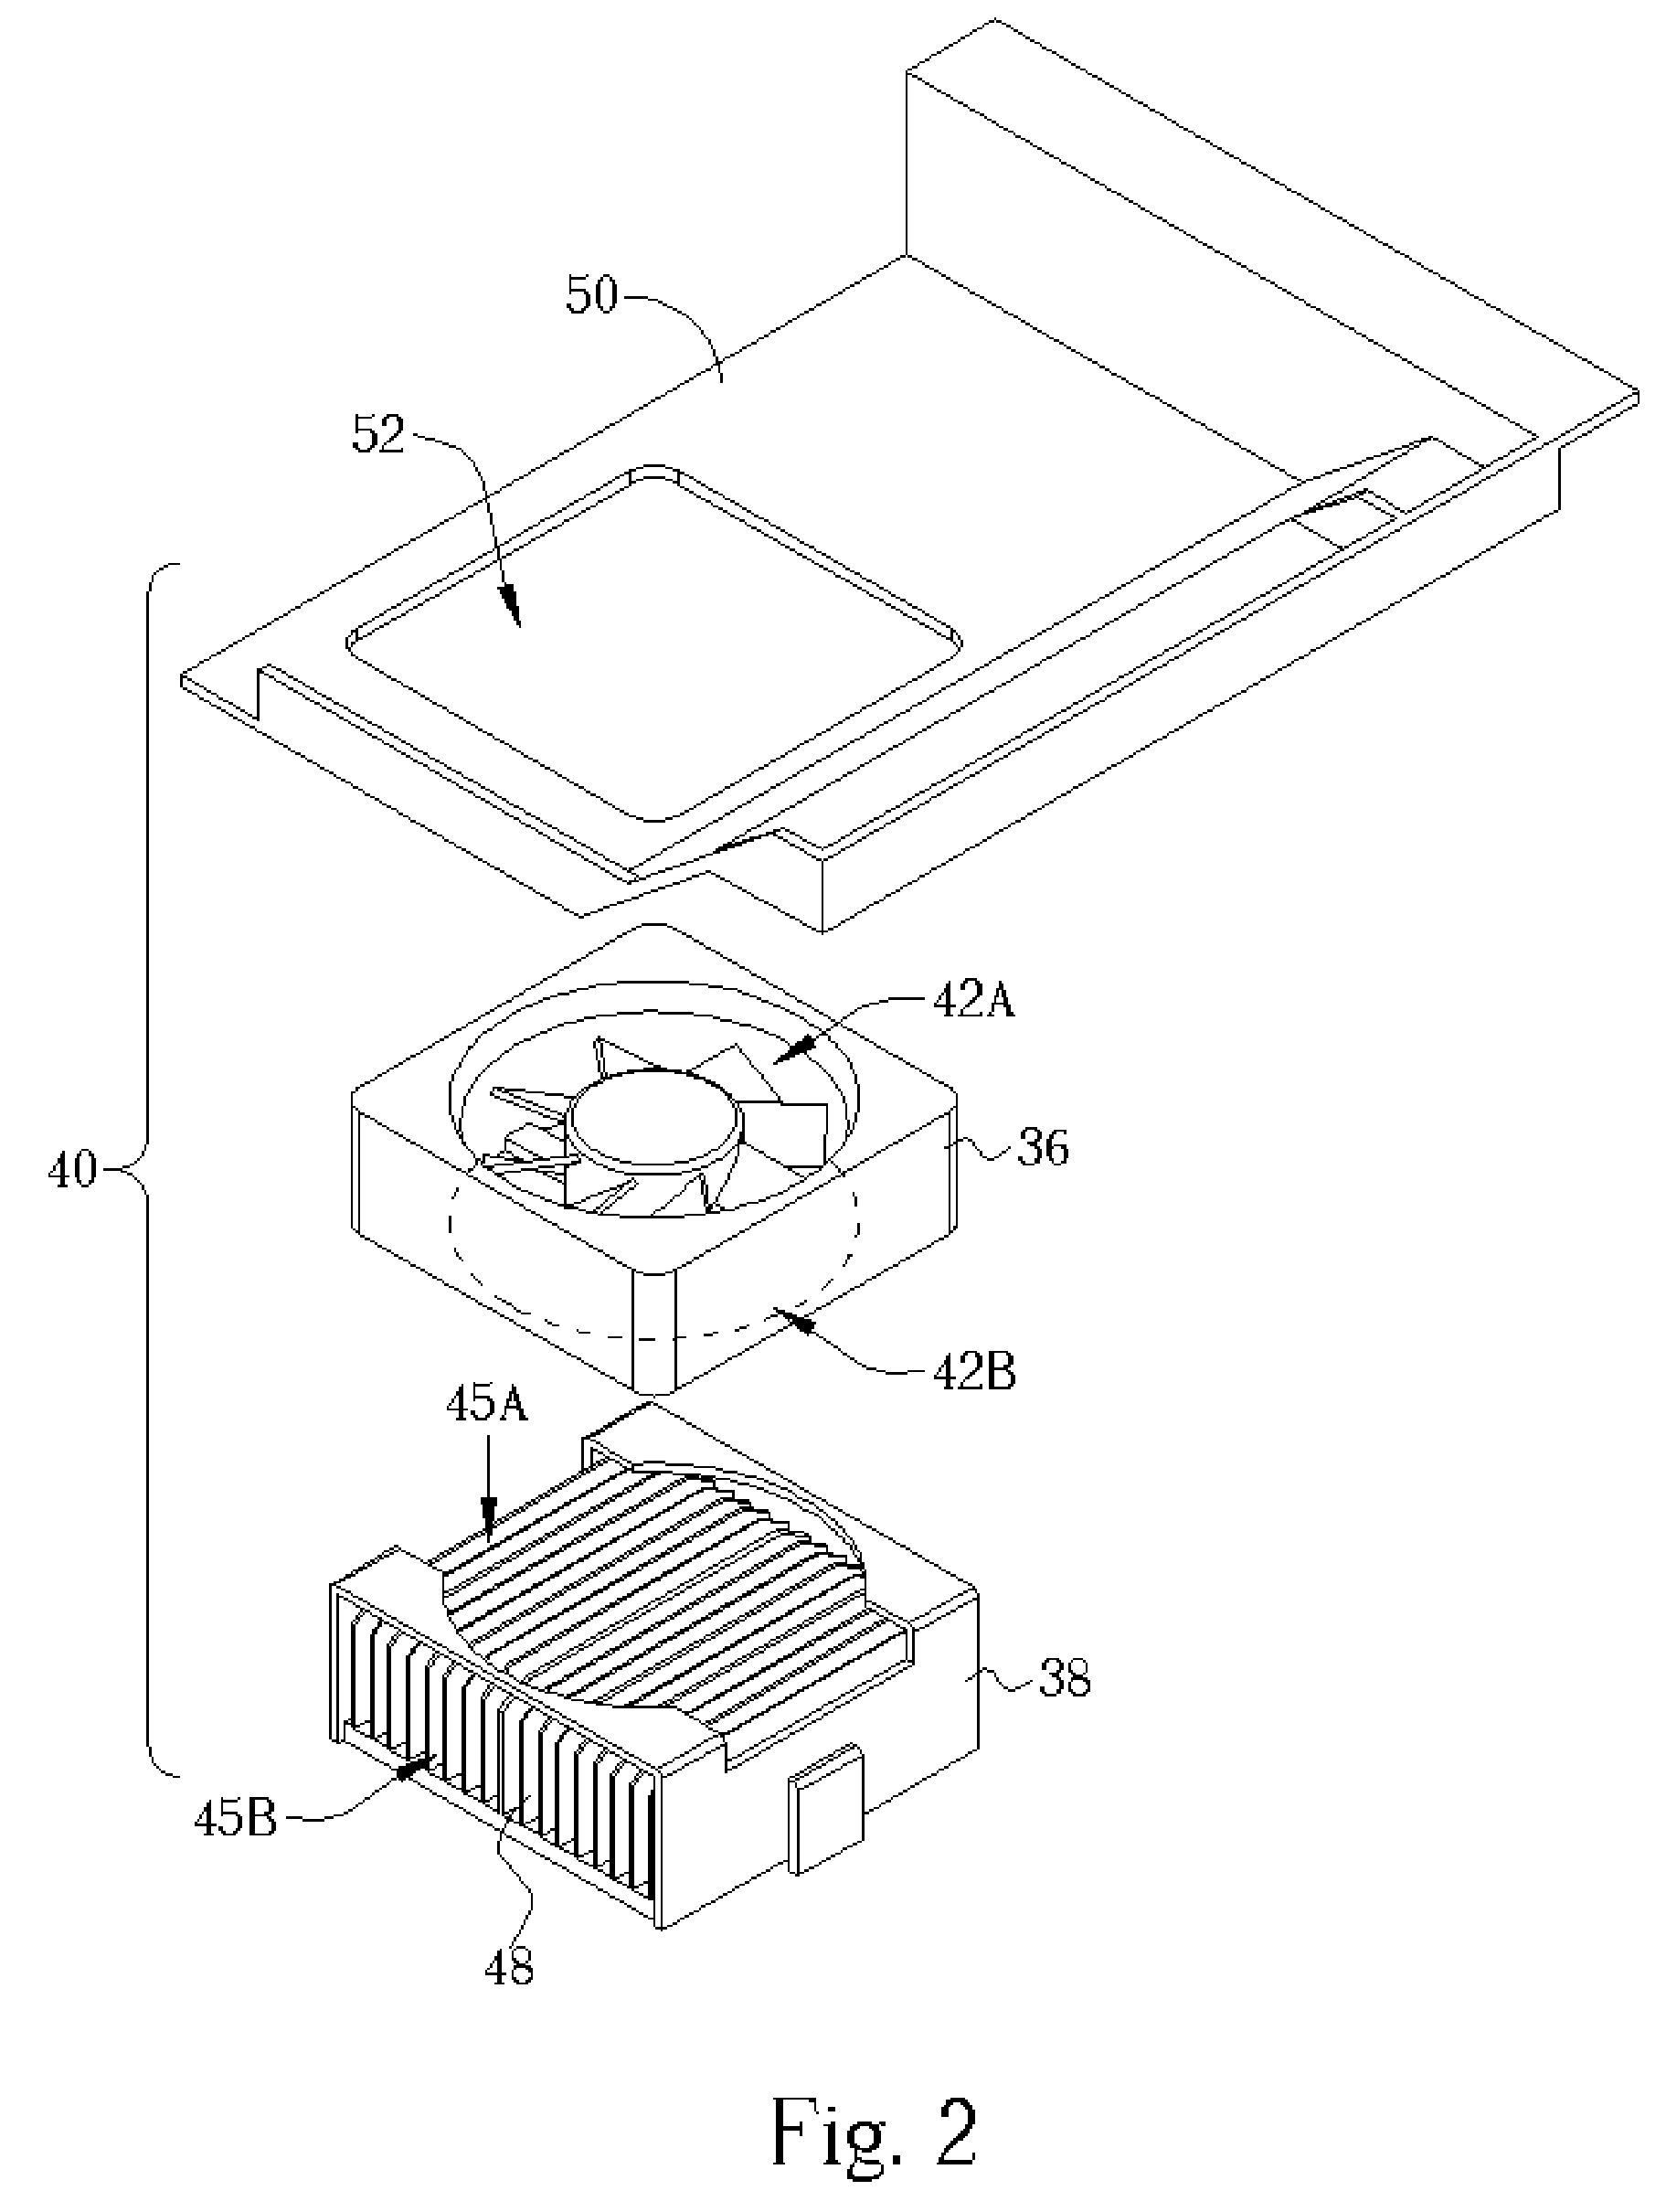 Cooling module of computer system and related apparatus with air wall for preventing recycling of heated air